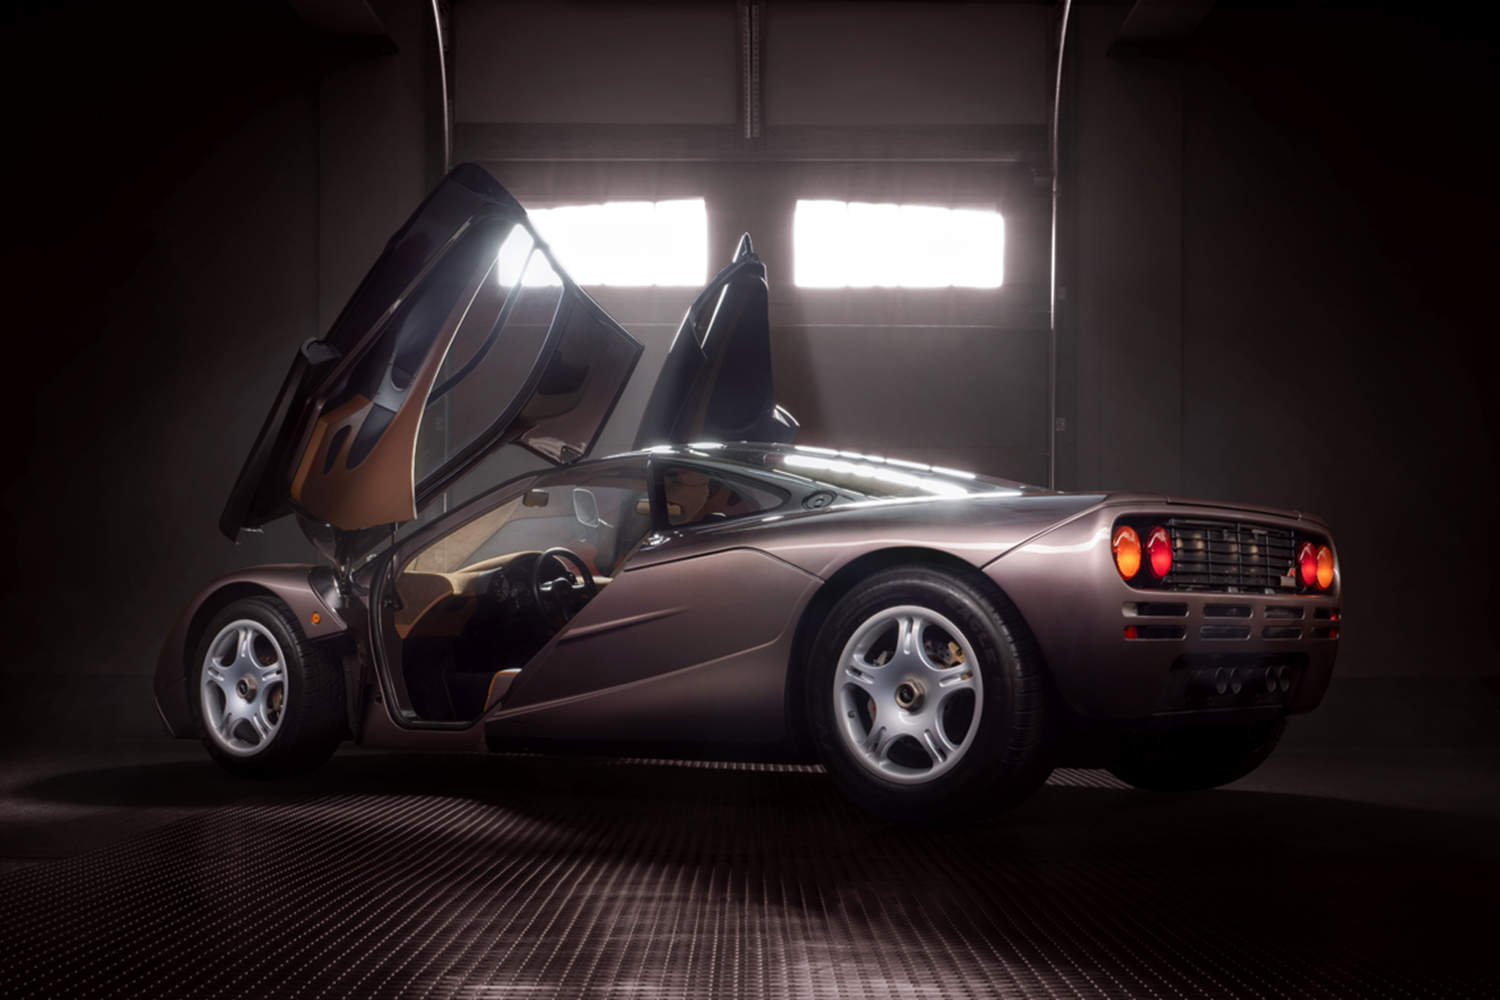 Butterfly doors opening on a 1995 McLaren F1, chassis 029, in Creighton Brown